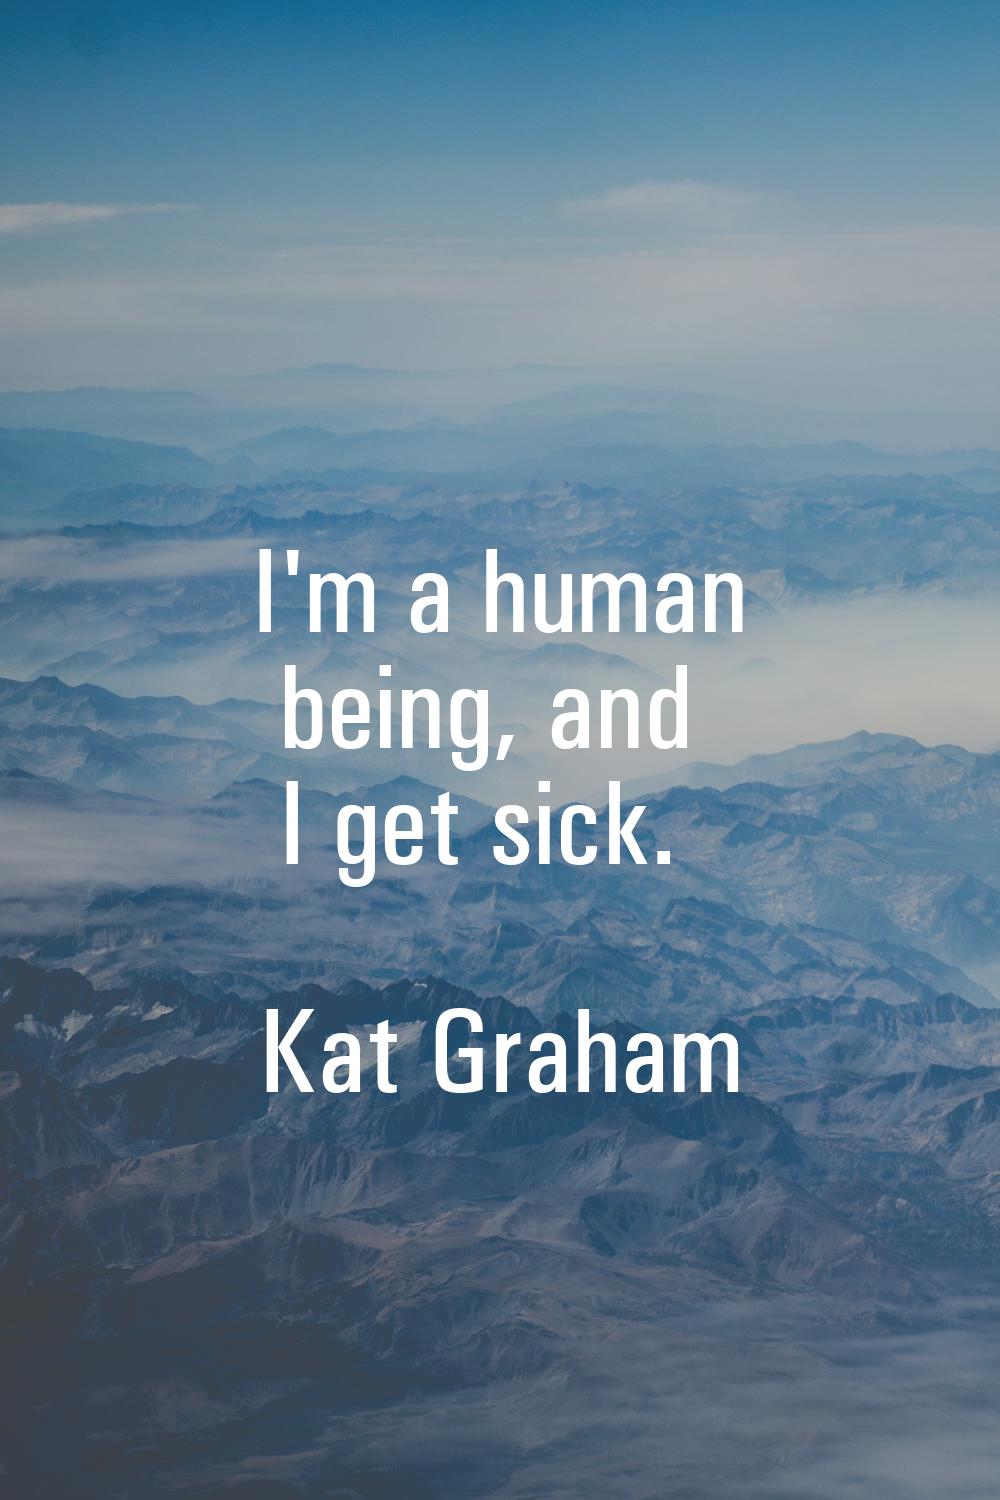 I'm a human being, and I get sick.